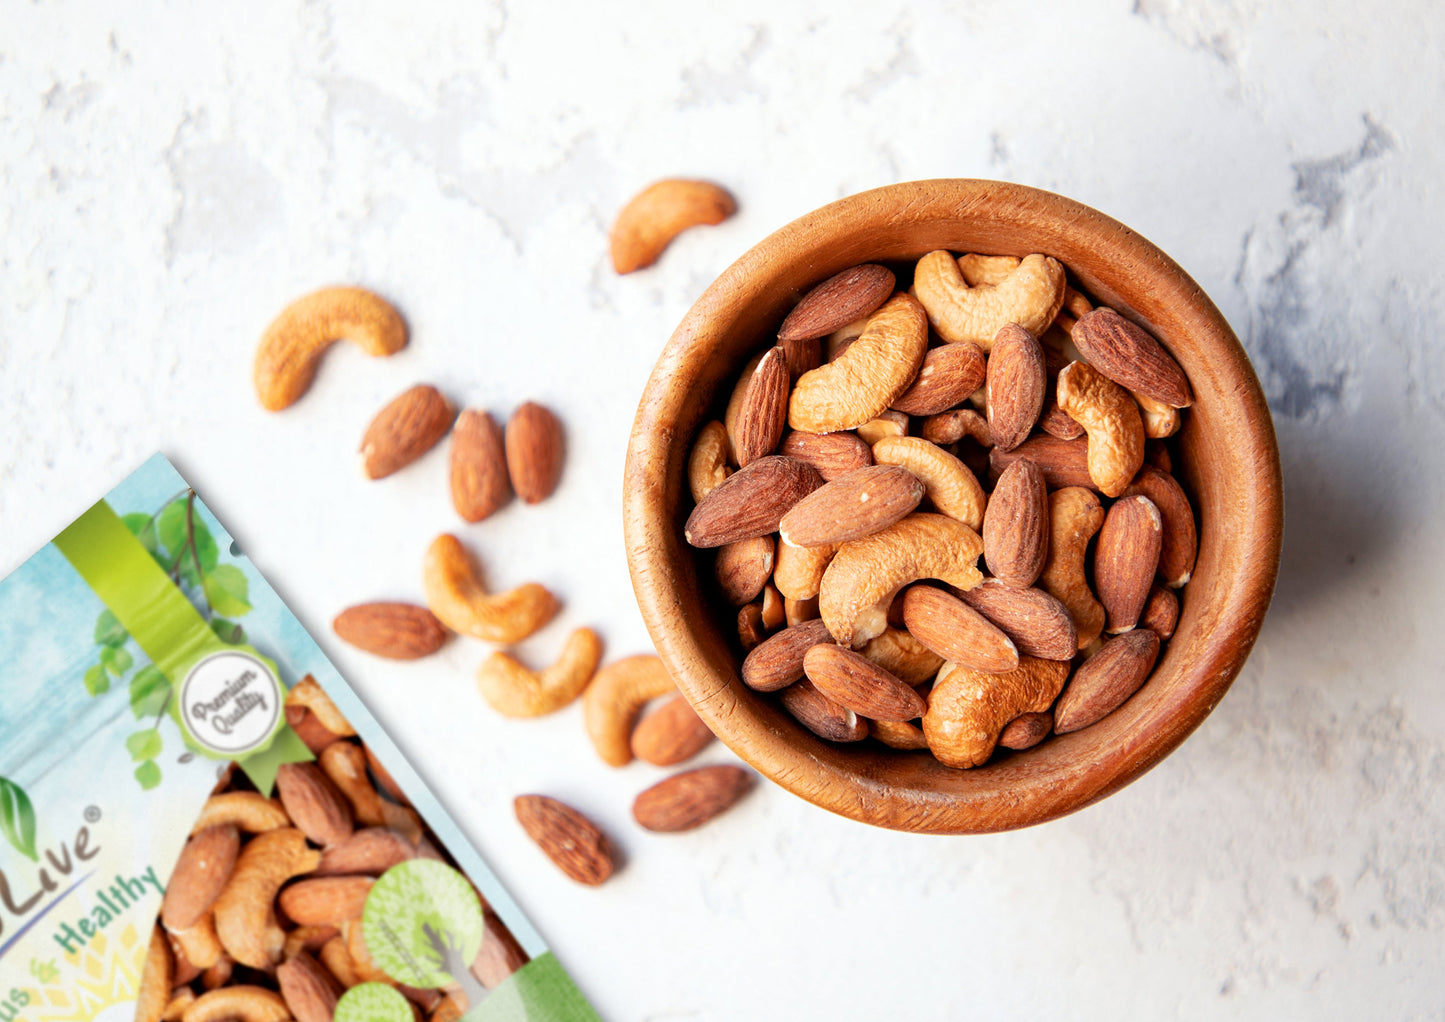 Almonds and Cashews Mix – Dry Roasted Nuts with Himalayan Salt, Protein Rich Trail Mix, Healthy Vegan Snack, No Oils and Preservatives, Good Source of Fiber. Bulk